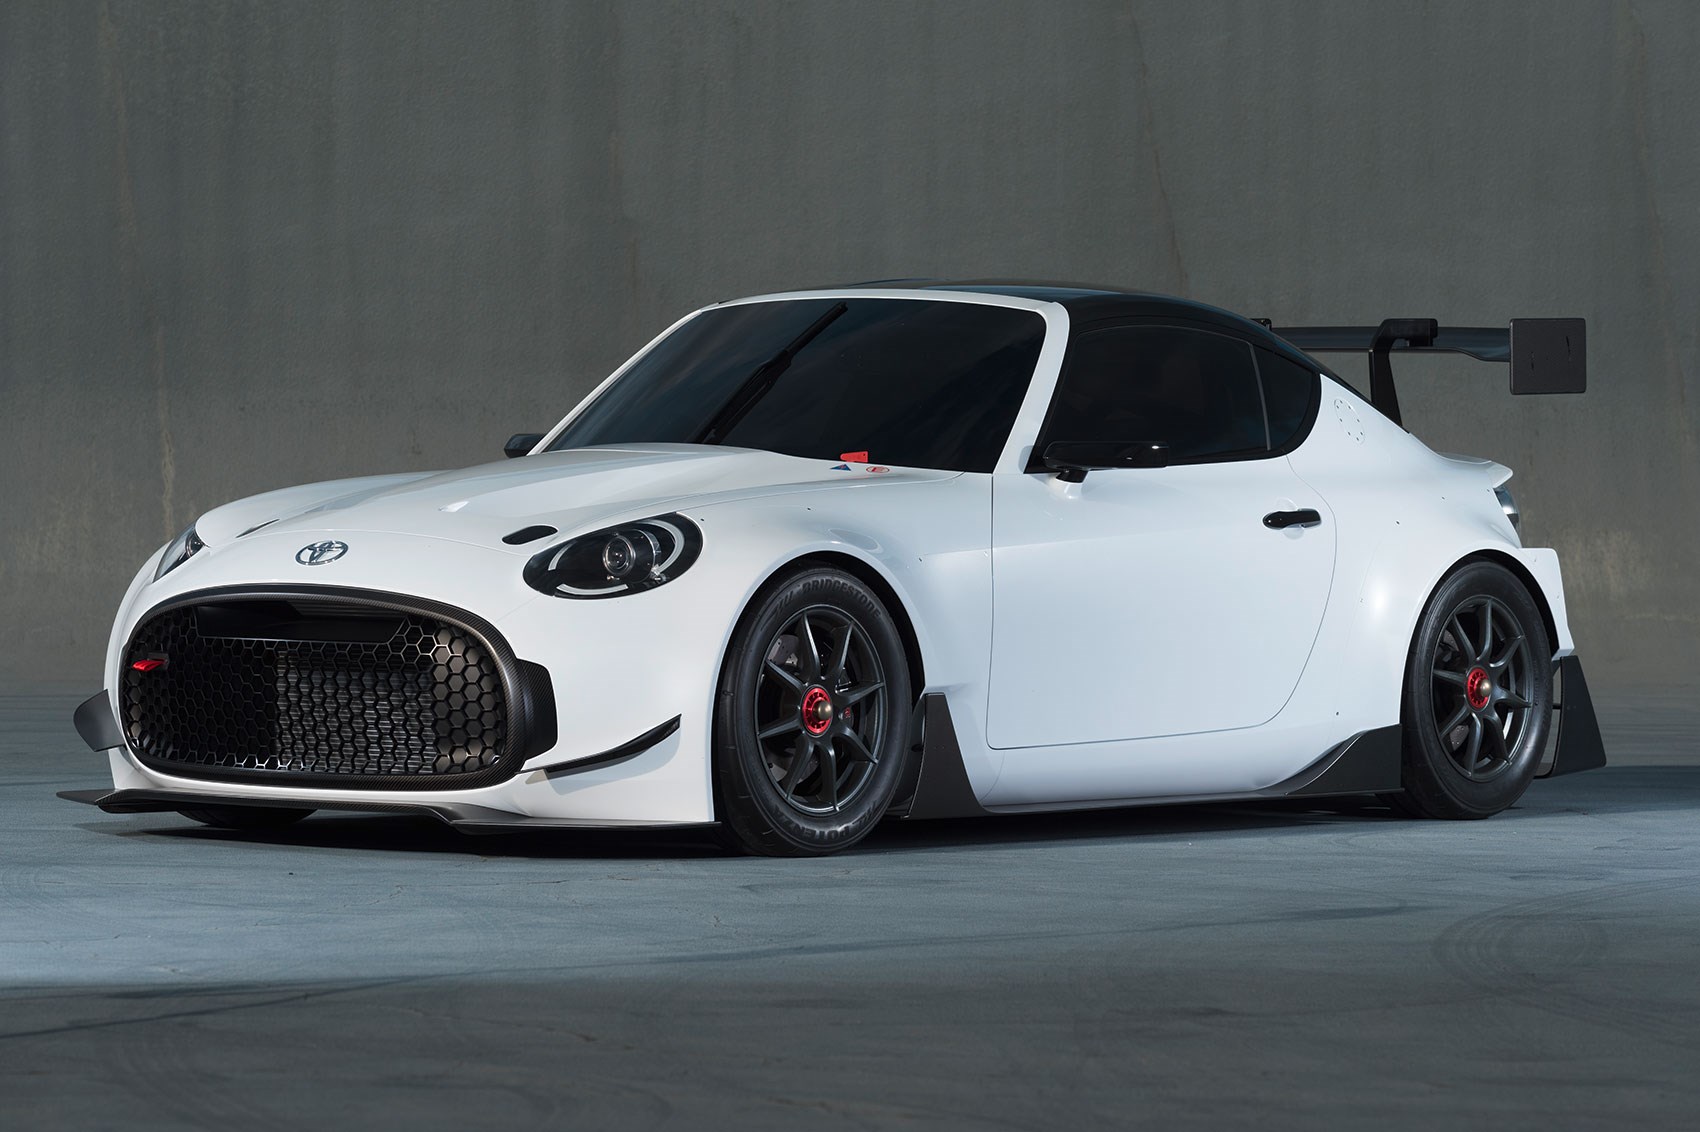 Production Go for Toyota's S-FR Concept